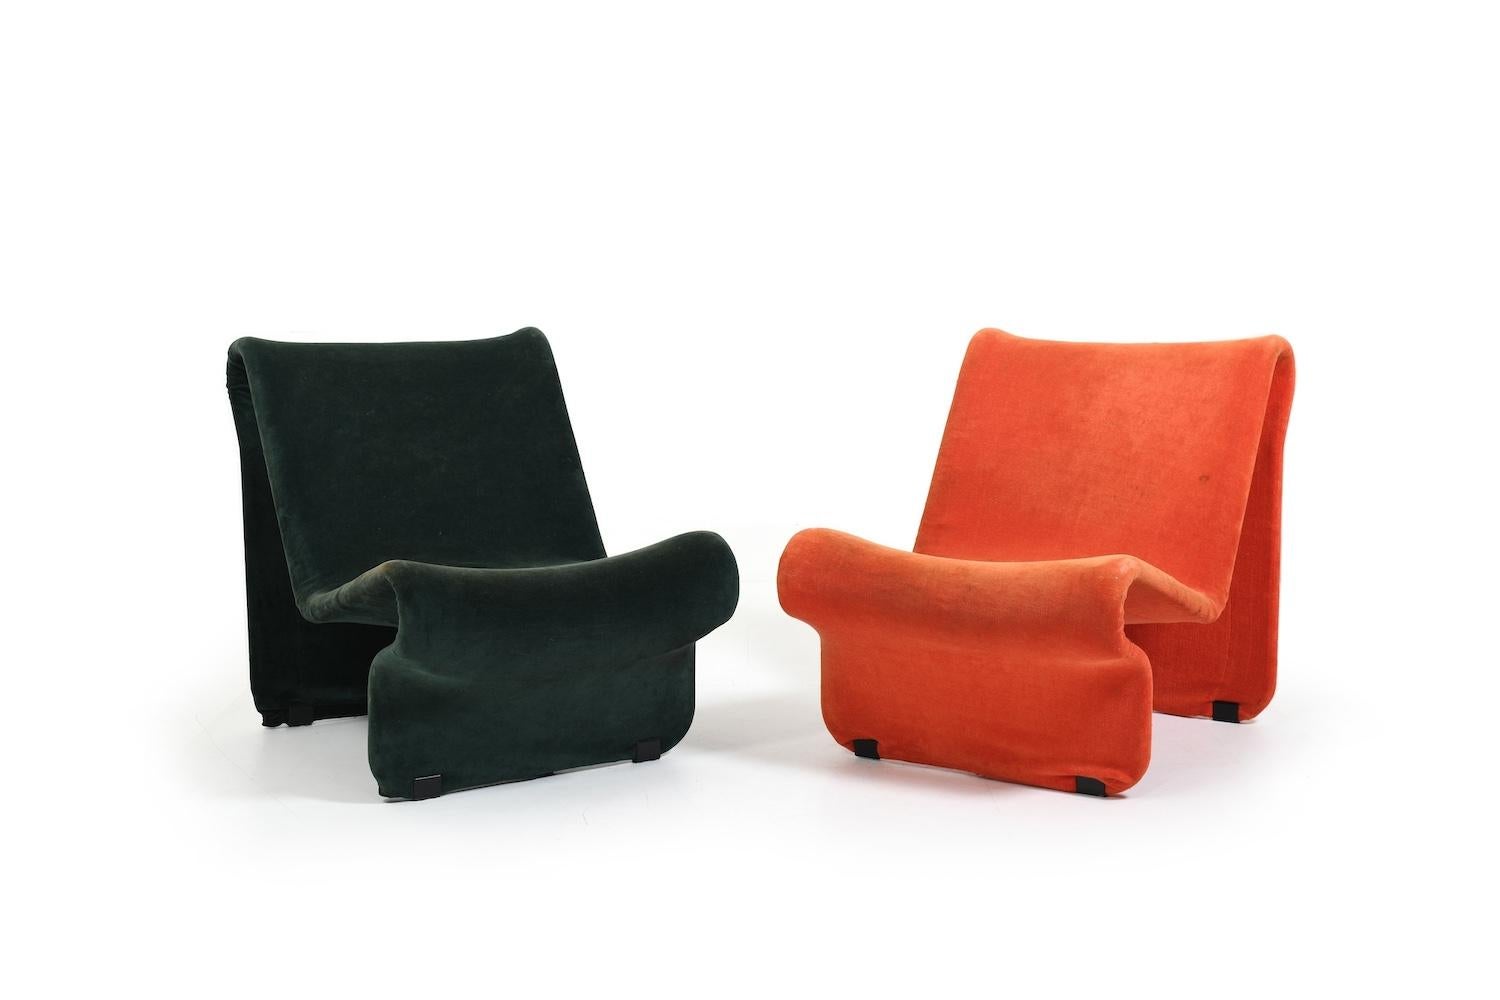 Scandinavian Modern Pair of Easychairs by Jan Dranger and Johan Huldt 1970s For Sale